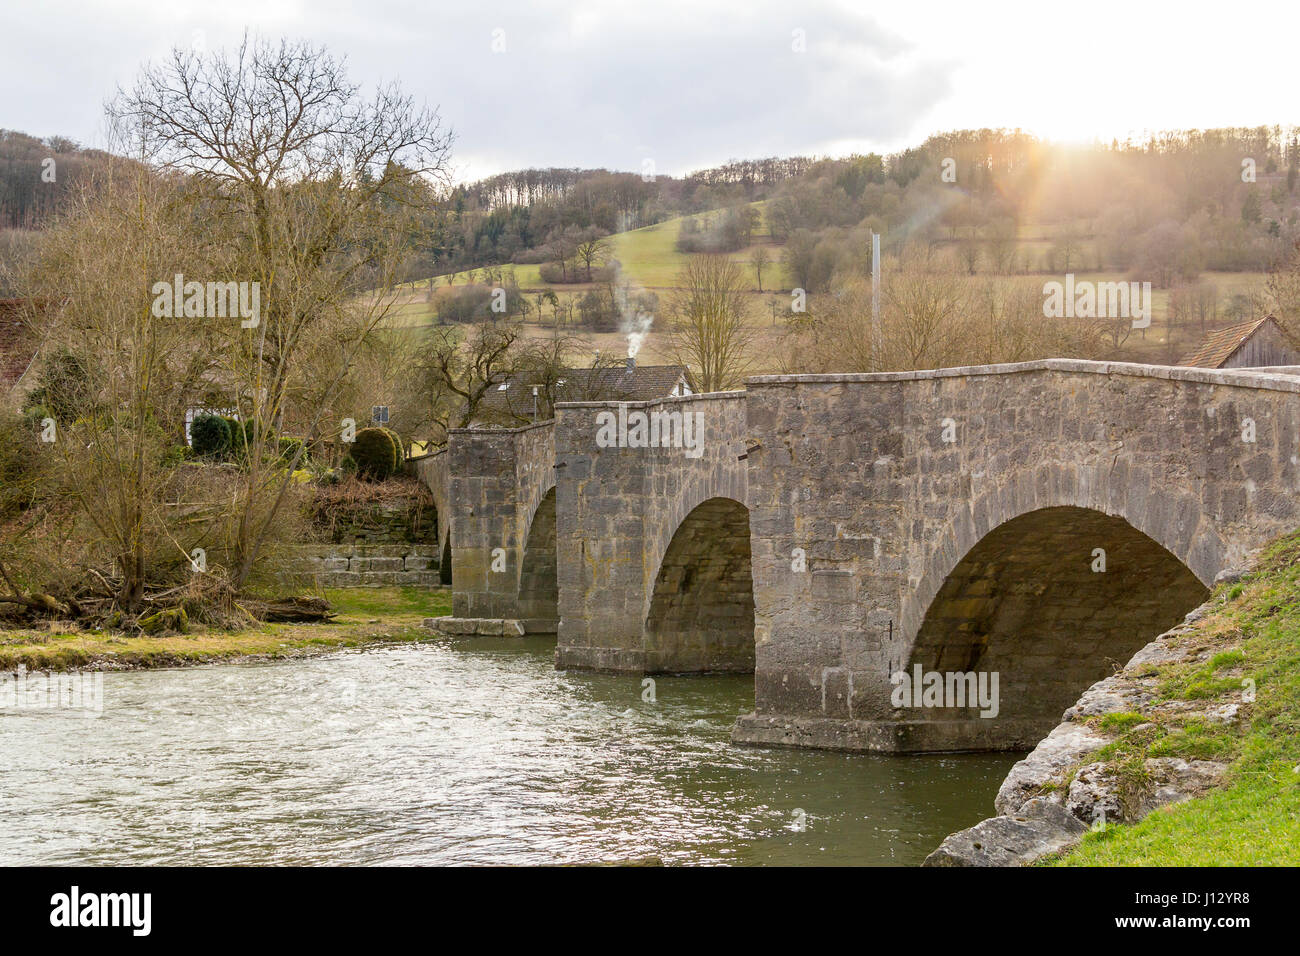 historic stone bridge at a small rural village named Oberregenbach near Langenburg in Hohenlohe, a area in Southern Germany Stock Photo